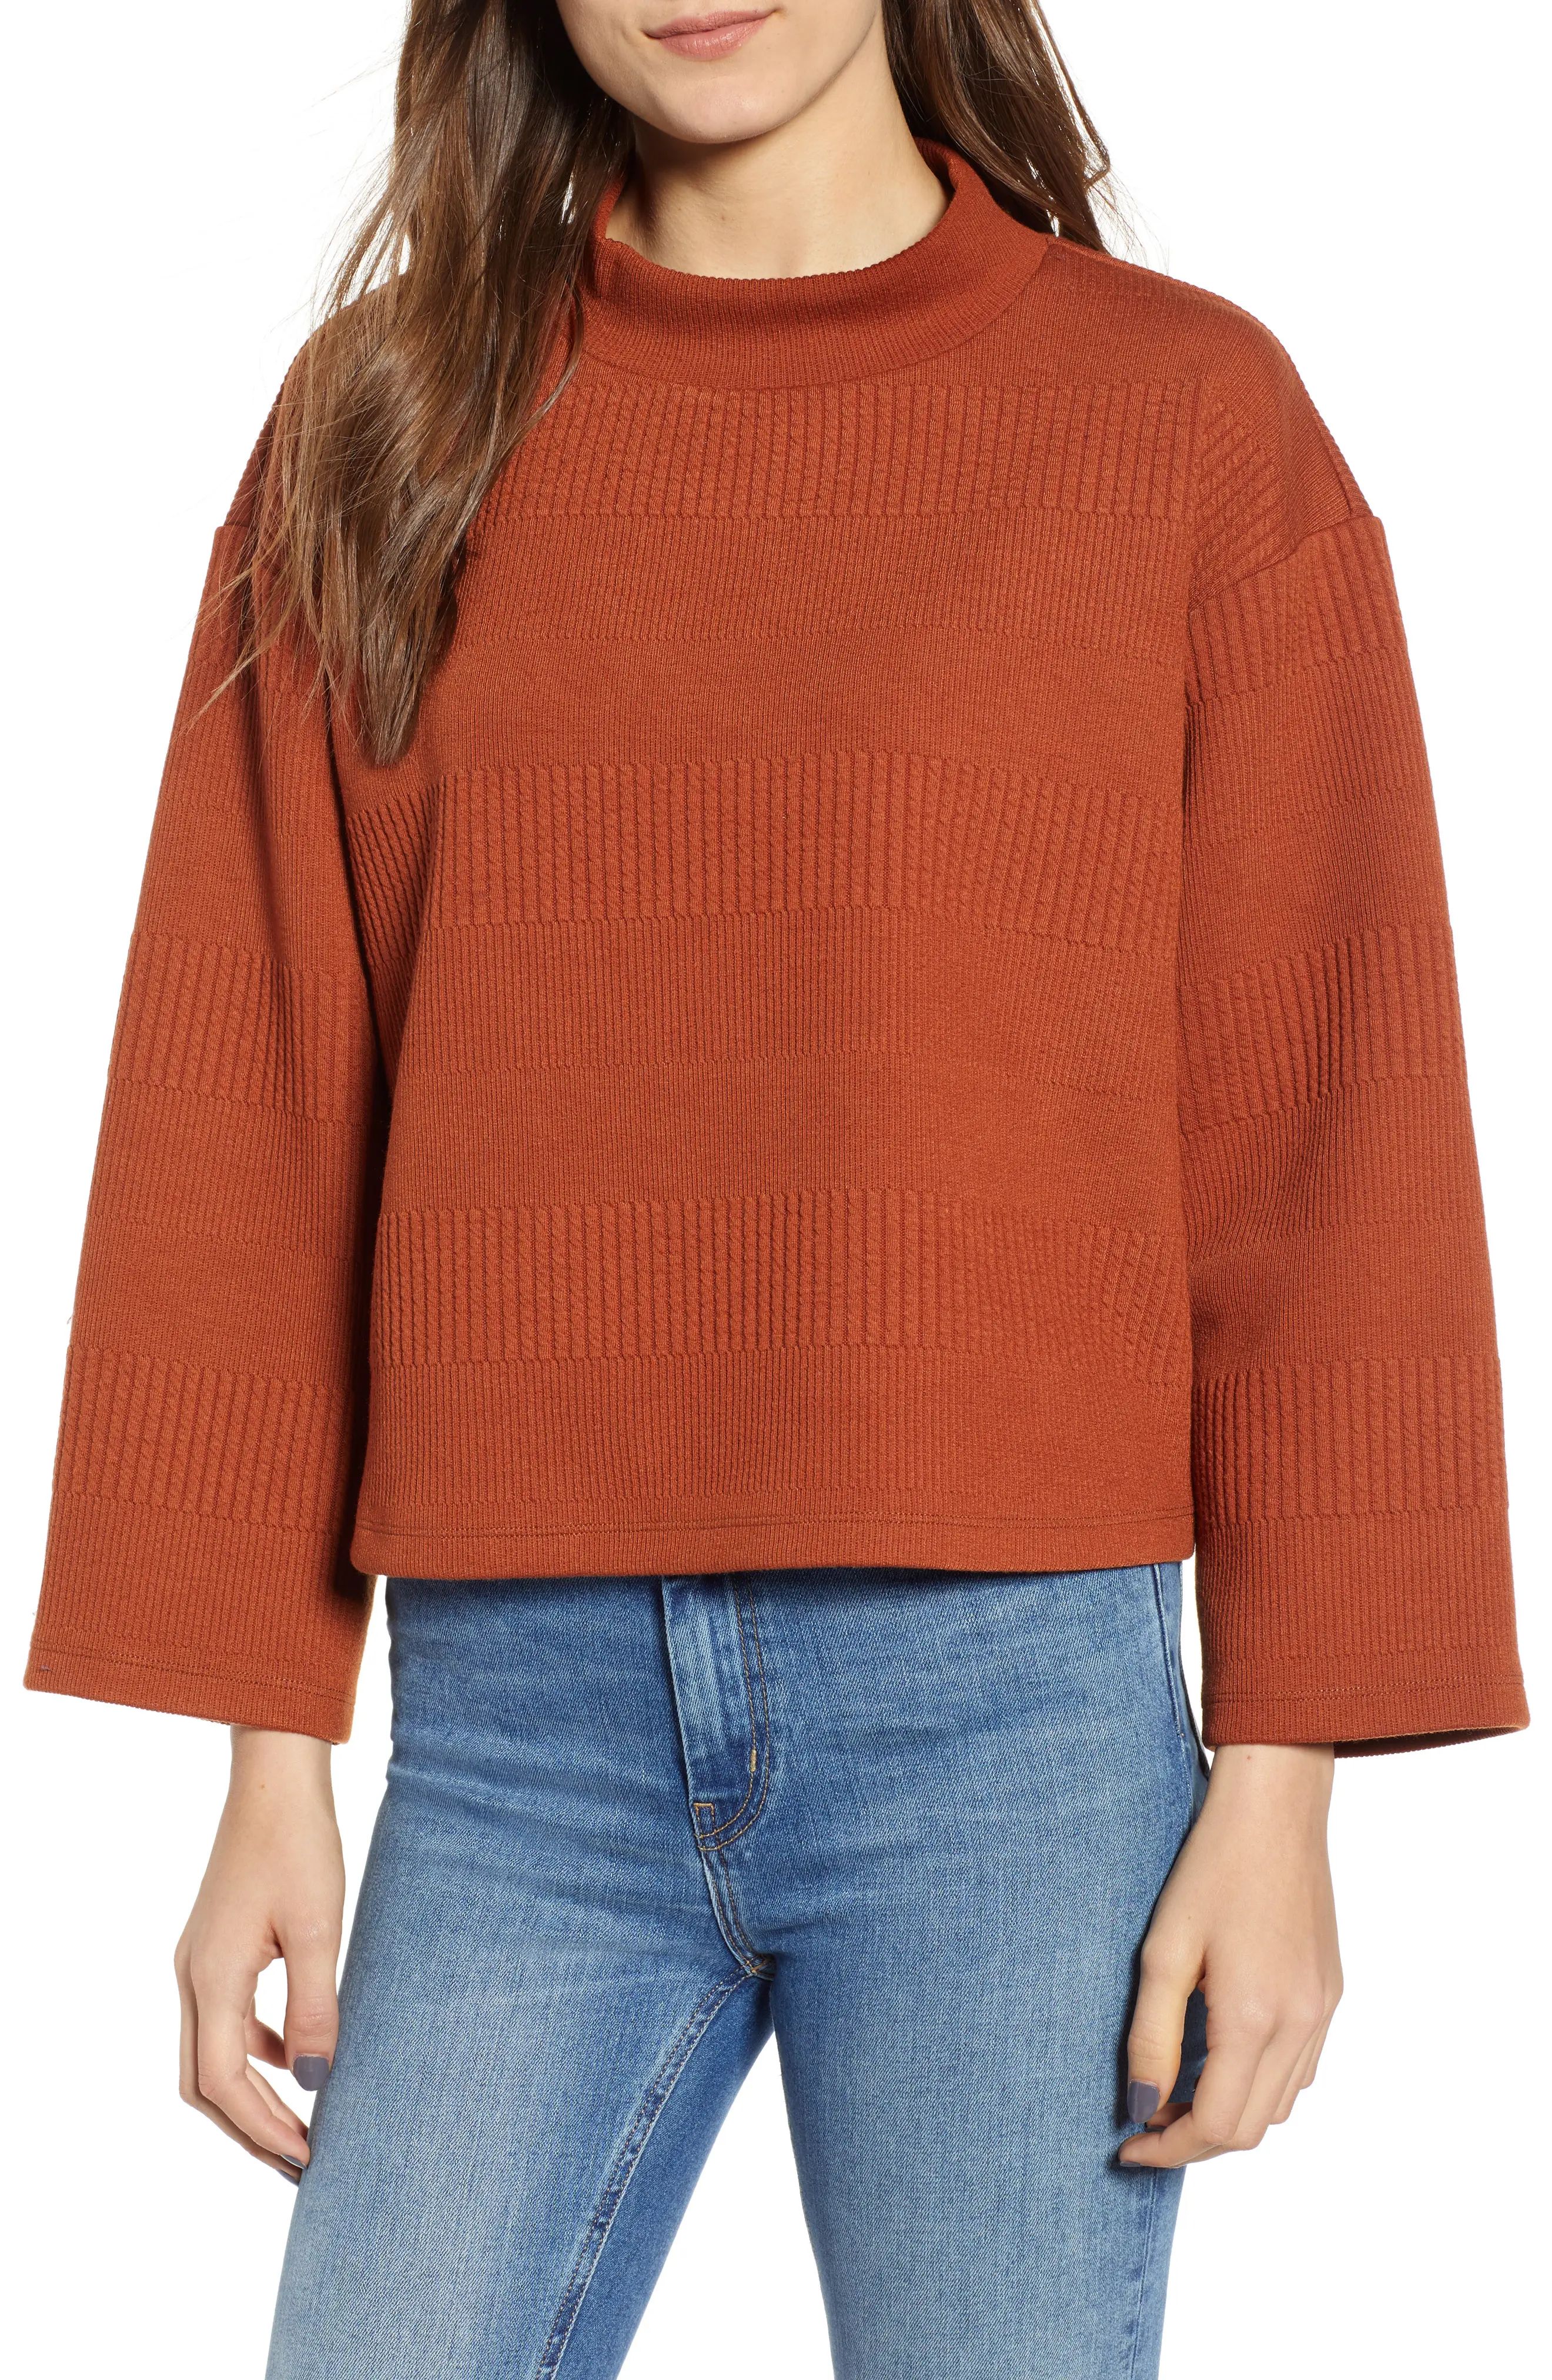 Women's Leith Crop Mock Neck Sweater, Size XX-Small - Brown | Nordstrom